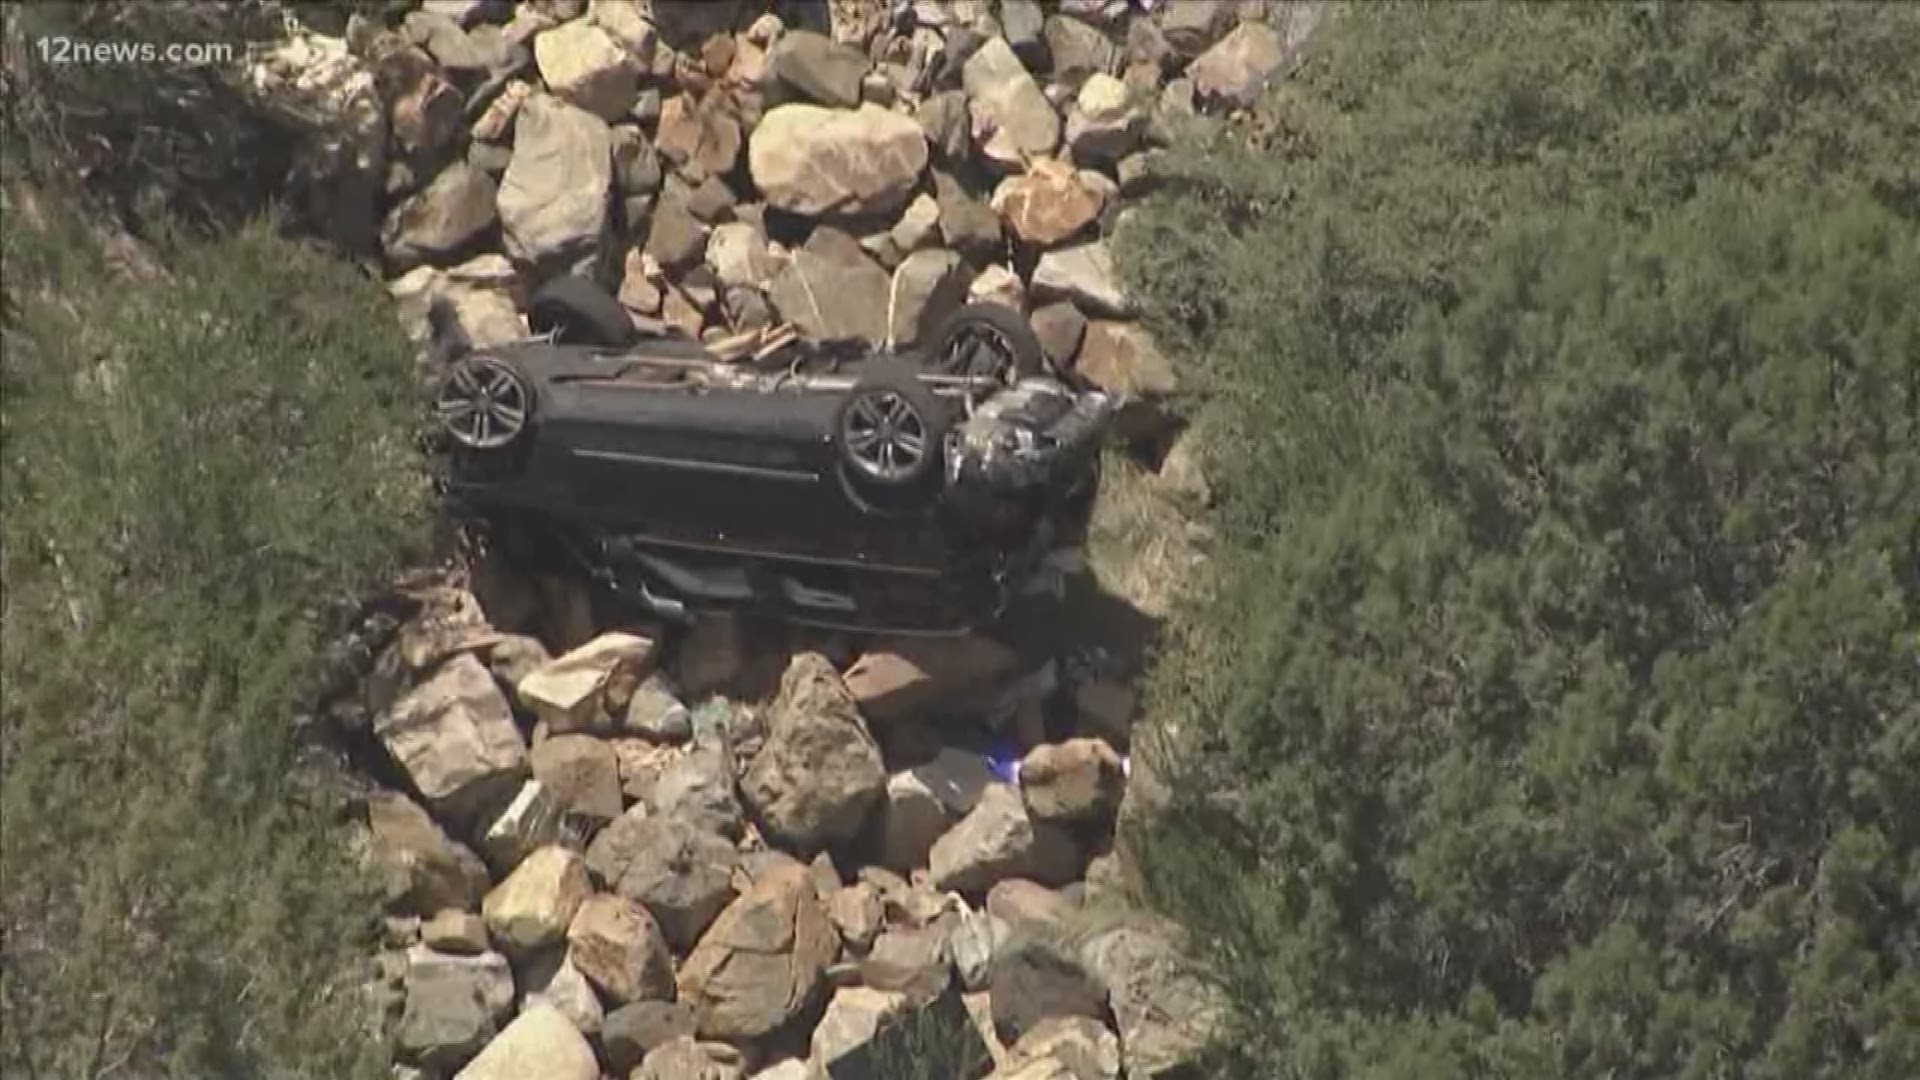 A car chase in Prescott Valley sent a suspect's SUV flying 500 feet off of a cliff. DPS troopers were pursuing the suspect because the car he was in was reported as stolen. The suspect bailed out of the car before it went over the cliff and was found in some trees.